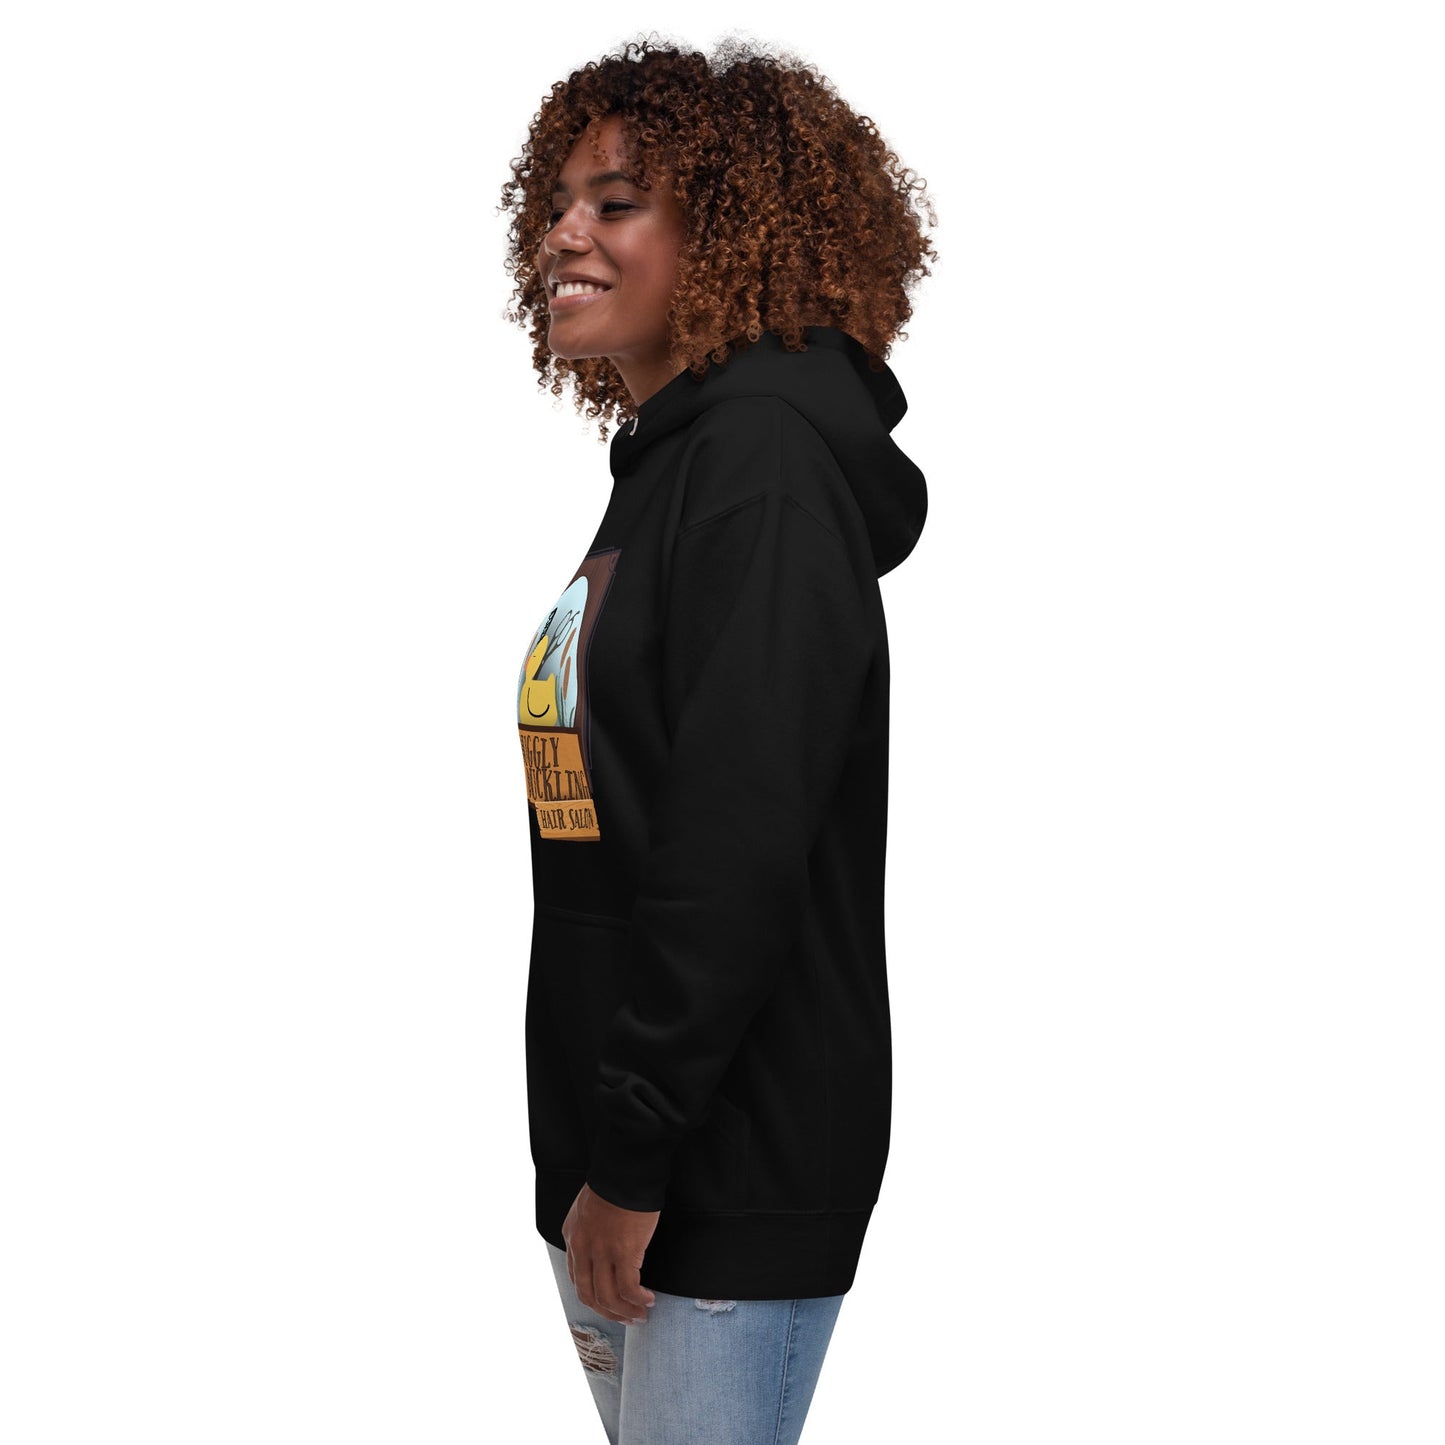 Snuggly Duckling Salon Unisex Hoodie adult hoodieadult tangledAdult T-ShirtWrong Lever Clothing